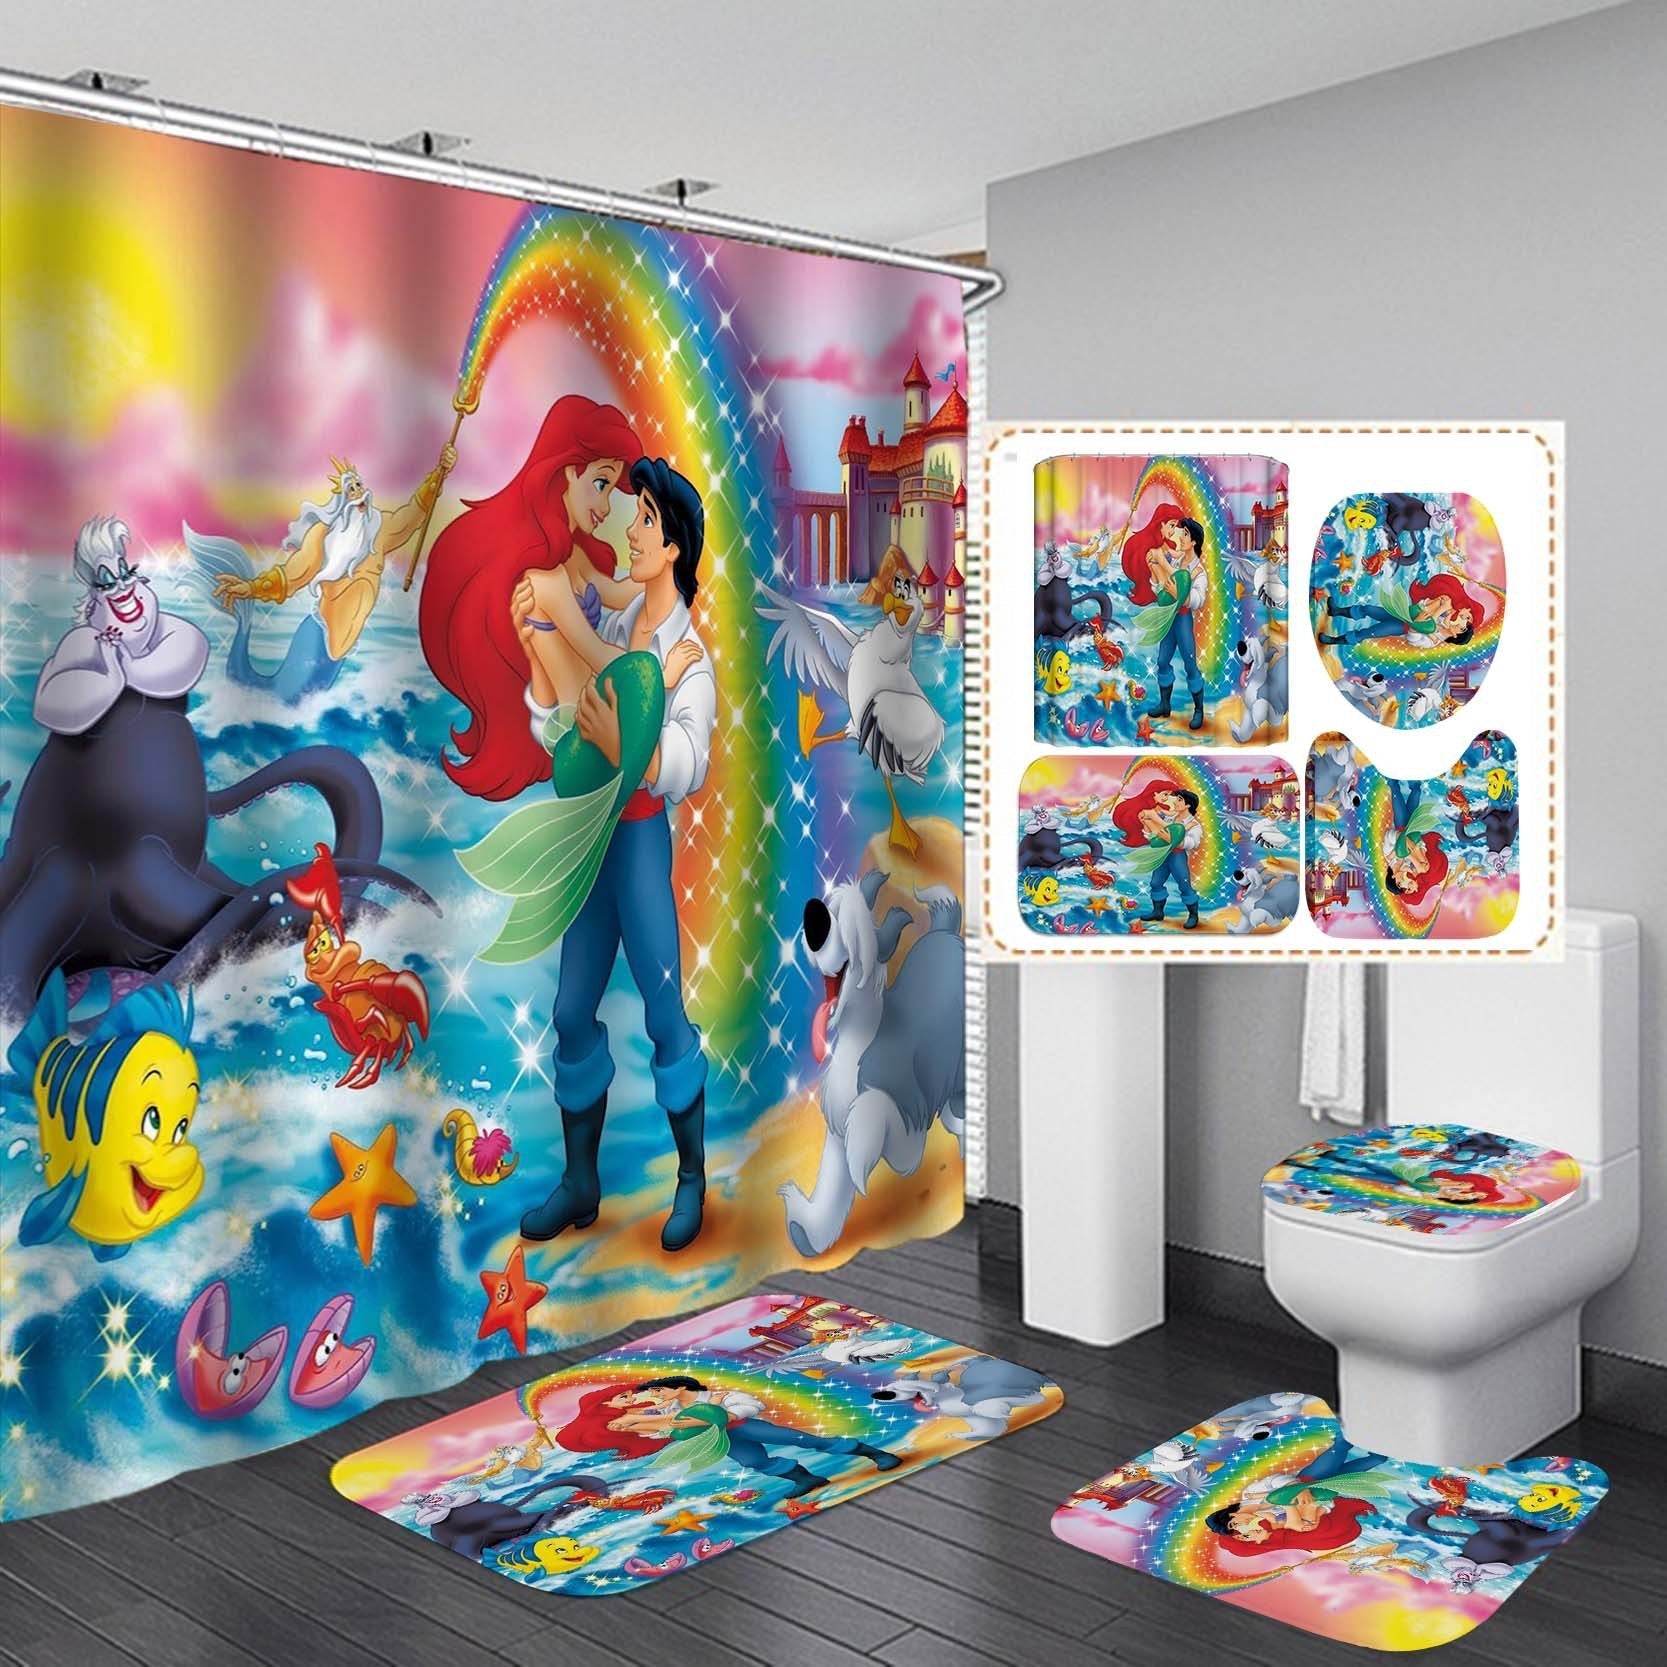 Cartoon Mermaid Design Shower Curtain Bathroom SetsNon-Slip Toilet Lid Cover-Shower Curtain-180×180cm Shower Curtain Only-3-Free Shipping Leatheretro